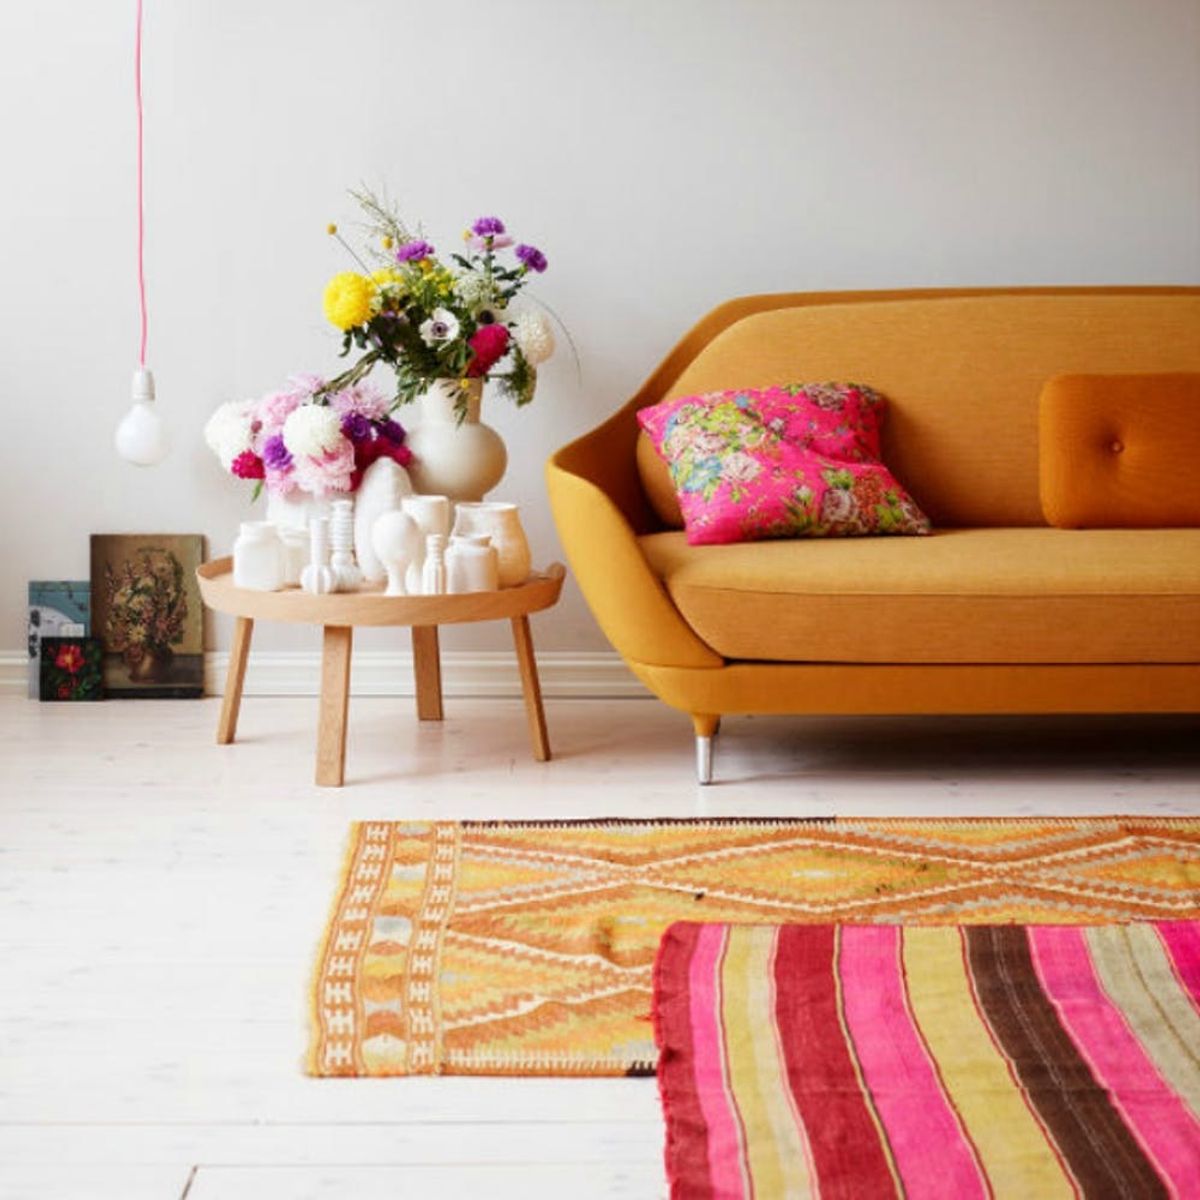 19 Times We *Crushed* on Kilim in Every Room of the House